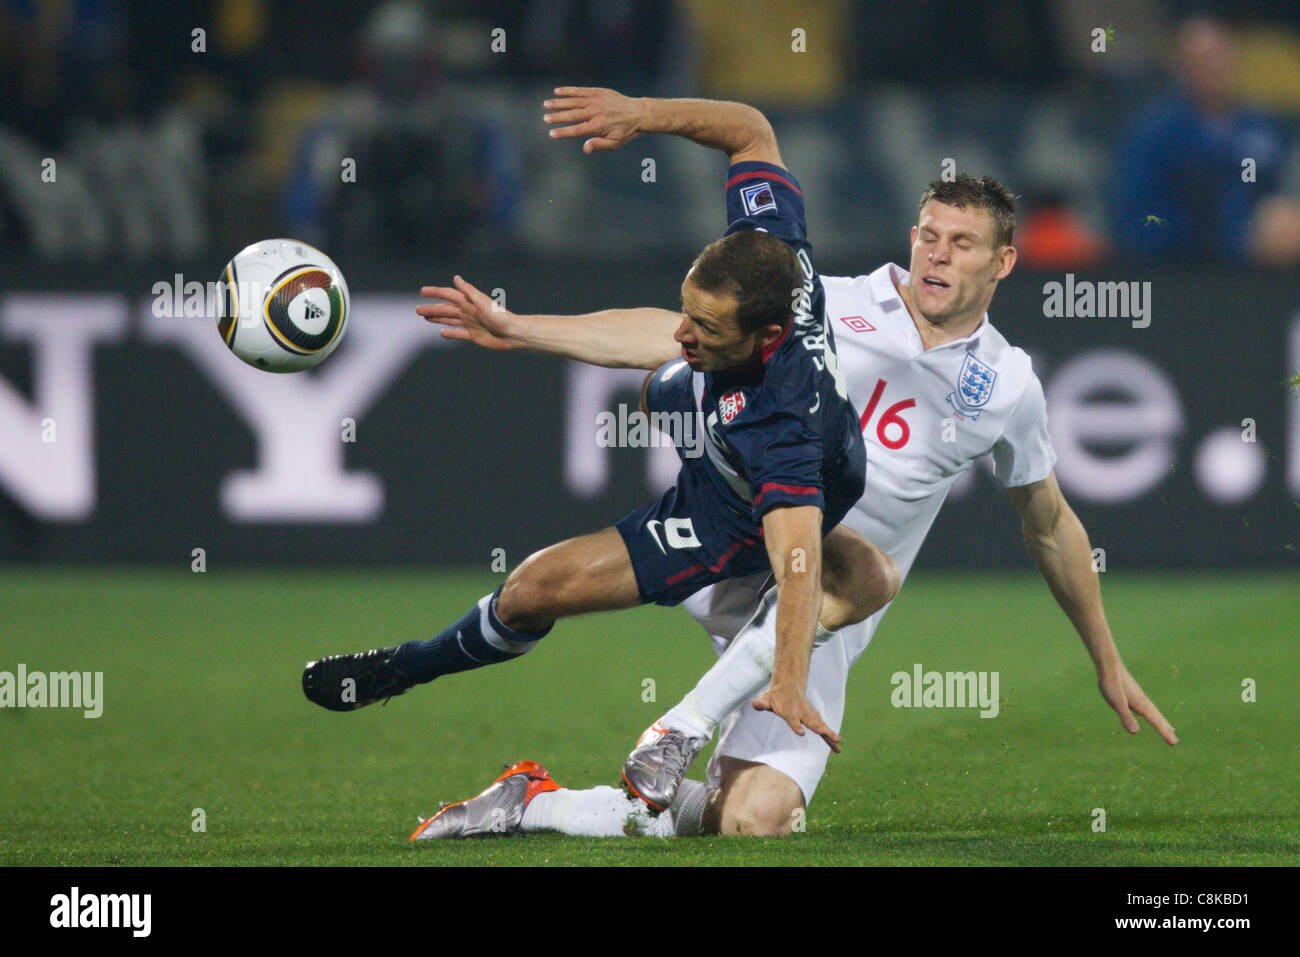 James Milner of England (R) tackles Steve Cherundolo of the United States (L) during a 2010 FIFA World Cup Group C match. Stock Photo